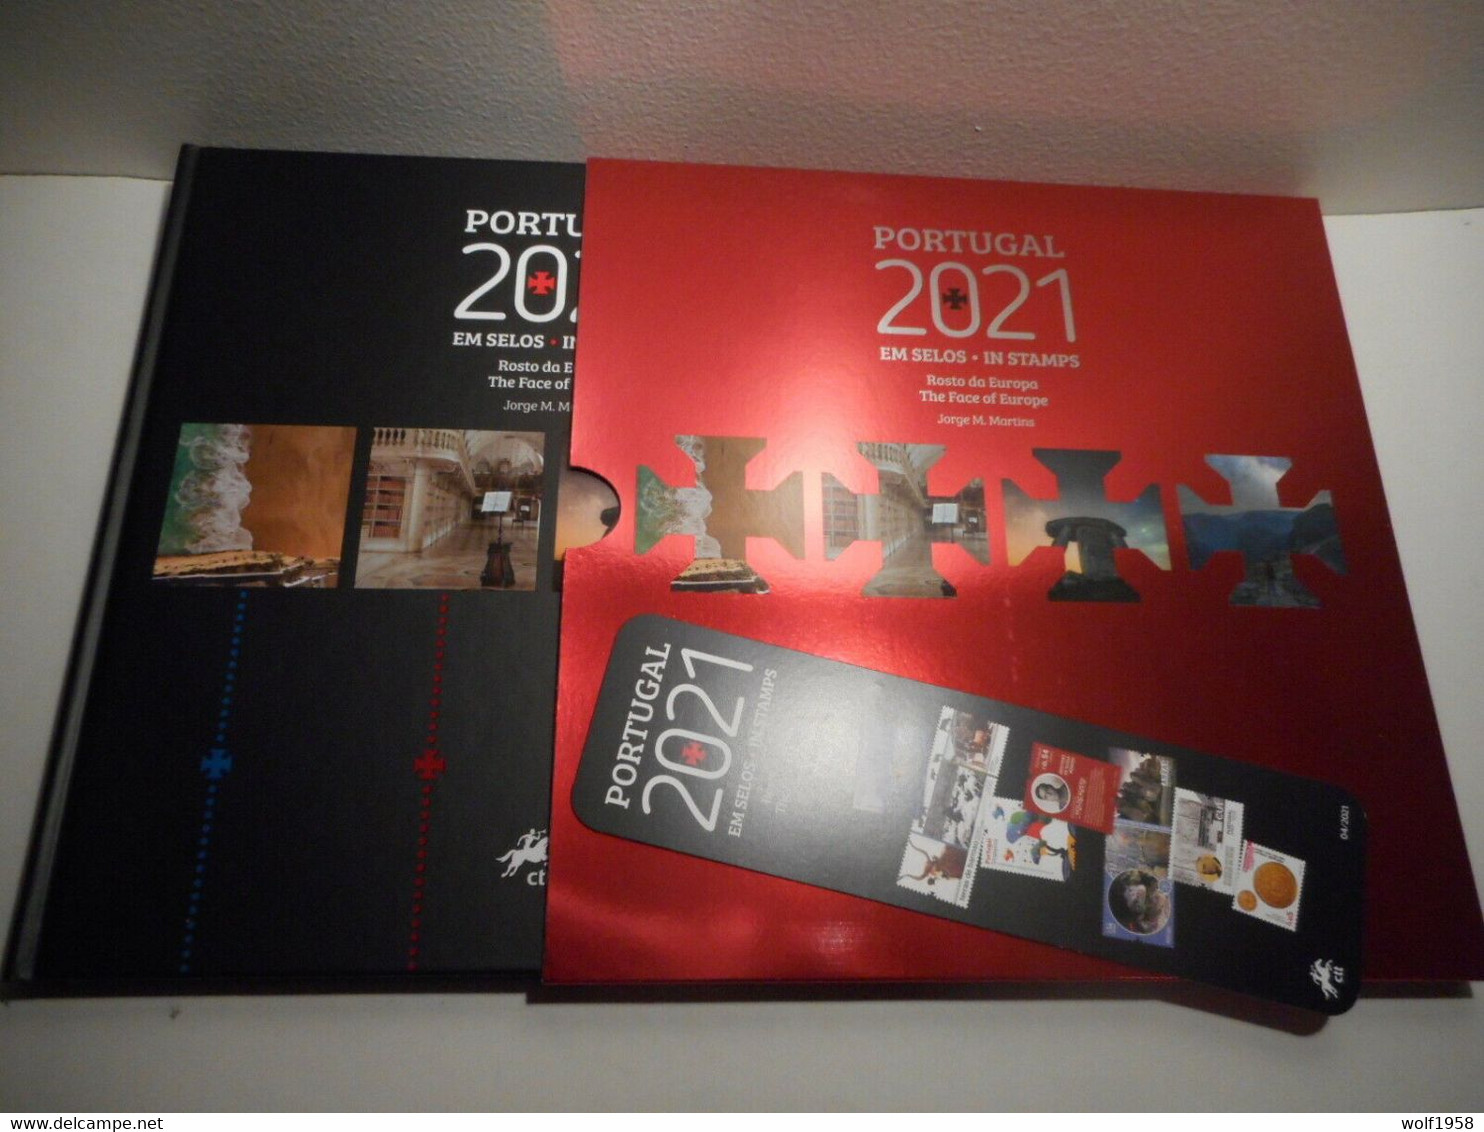 PORTUGAL IN STAMPS EM SELOS 2021 - YEAR BOOK - JAHRBUCH - Libro Dell'anno